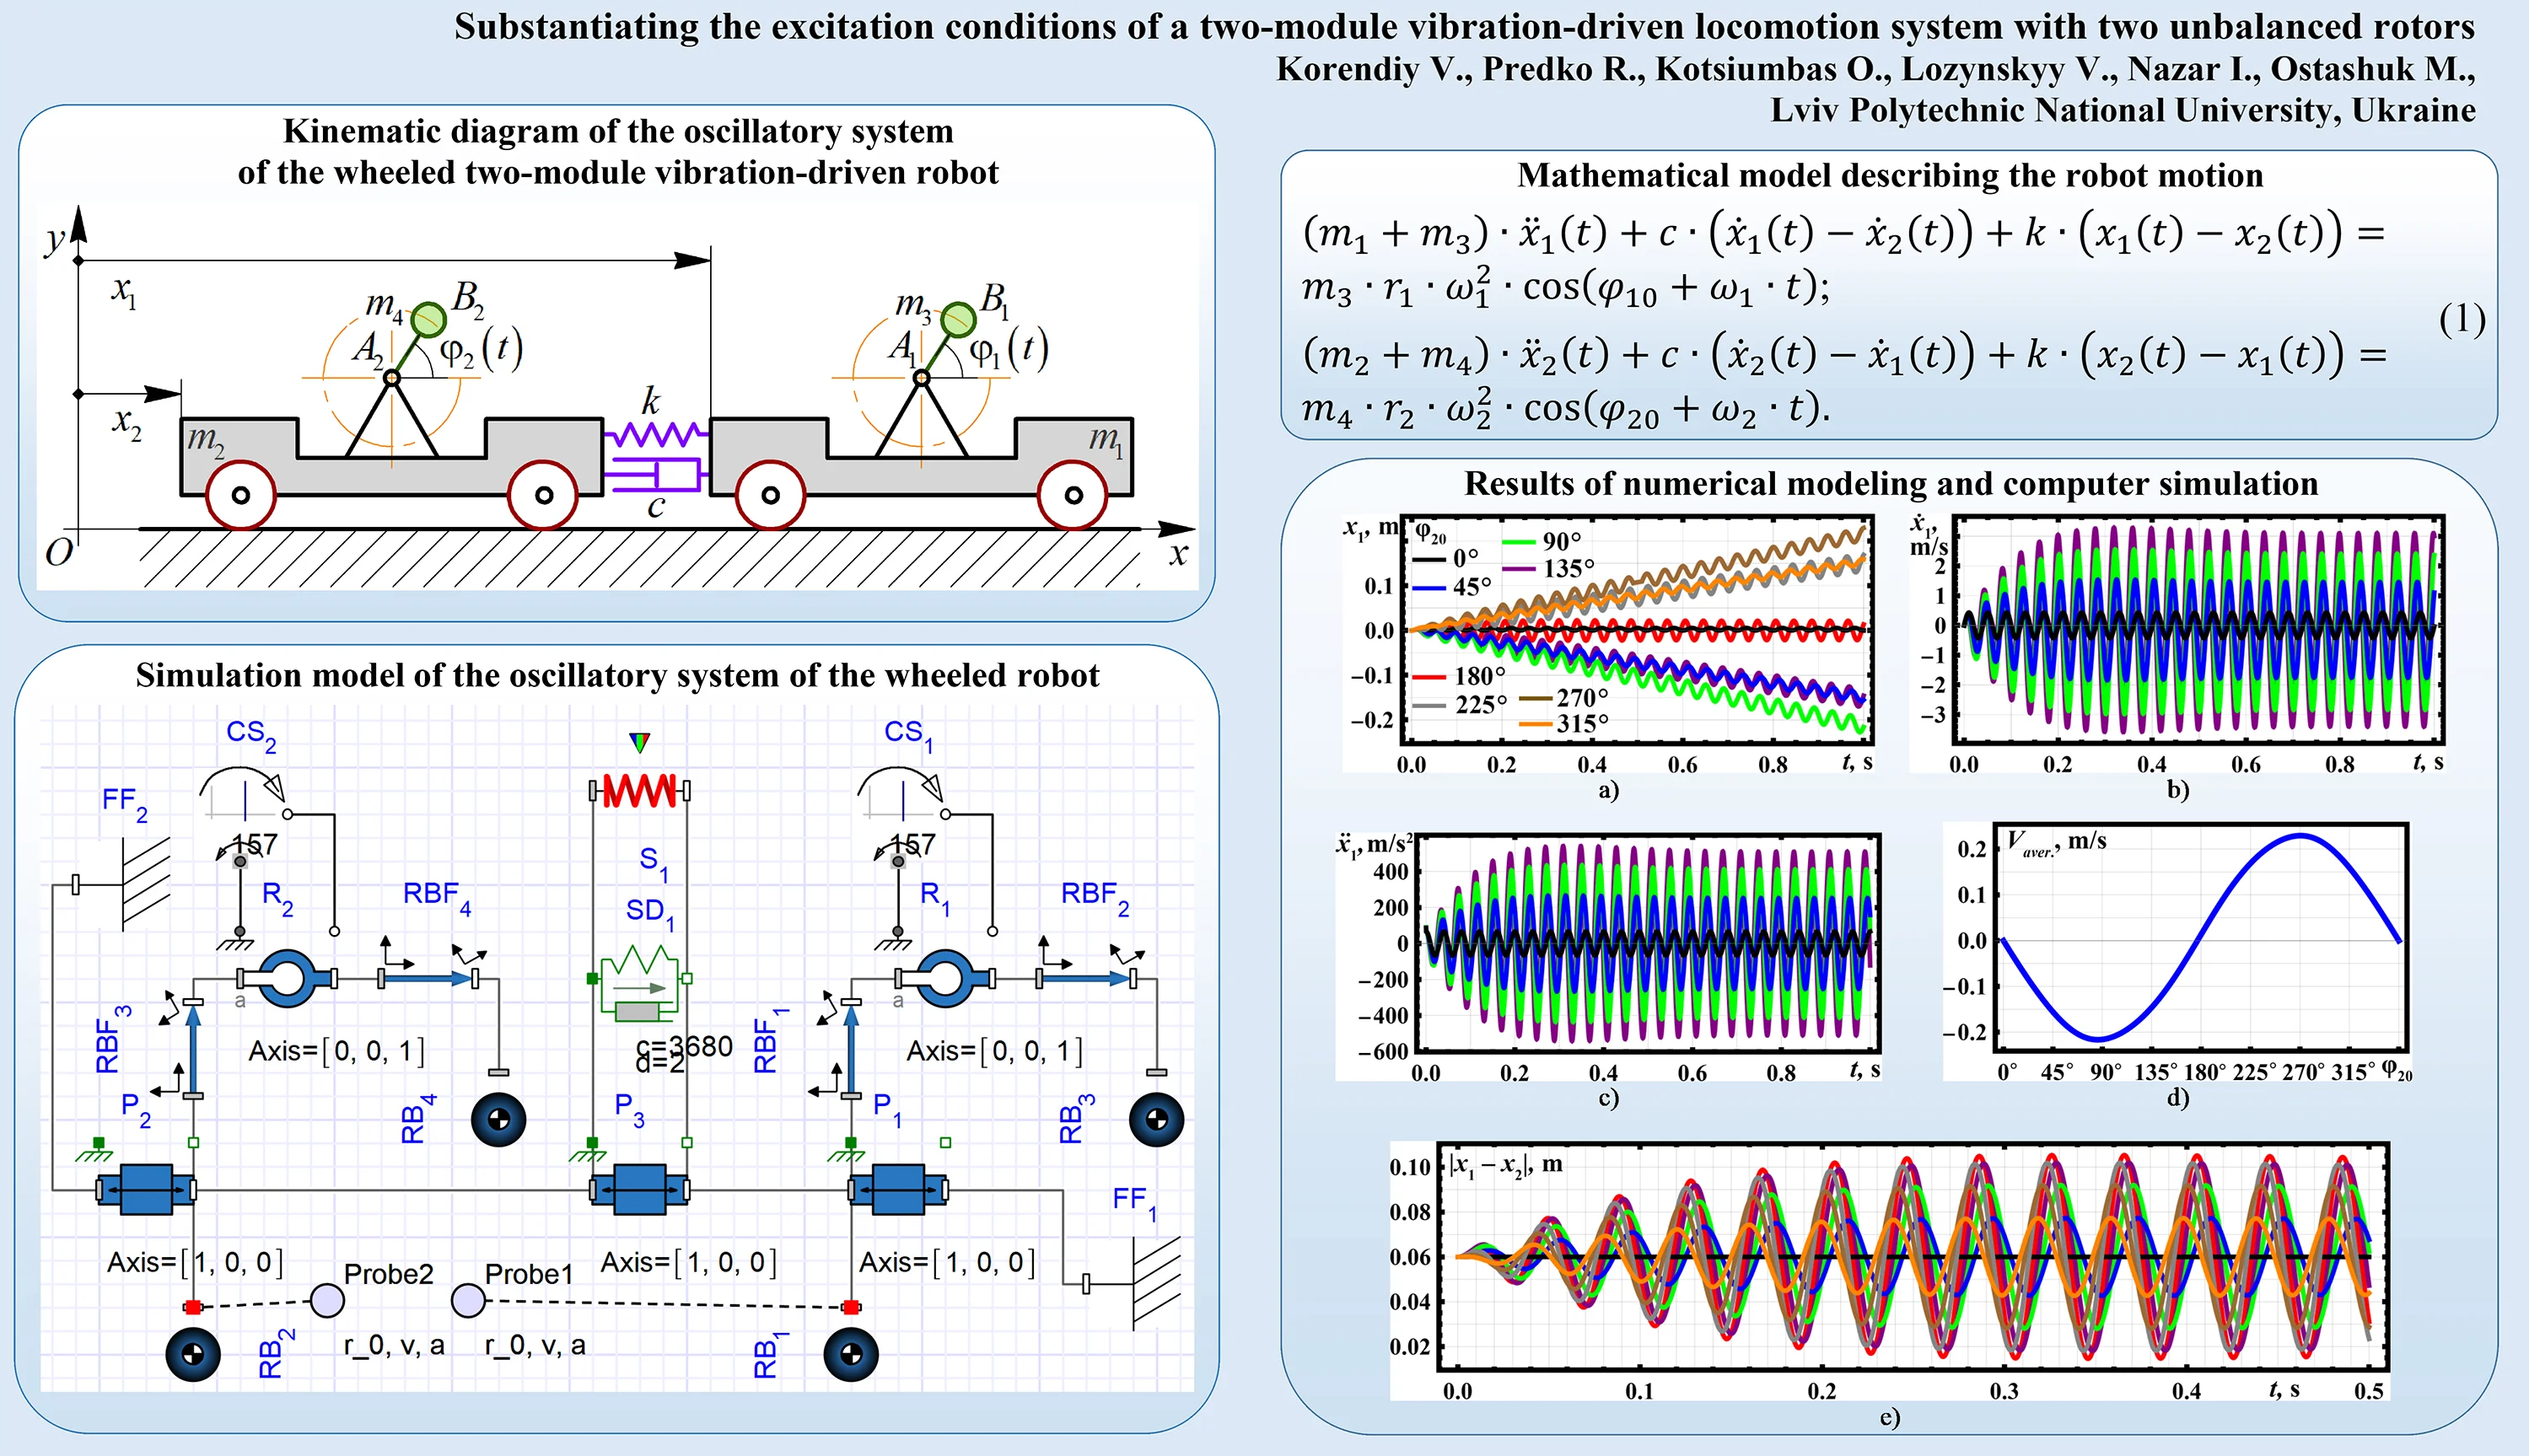 Substantiating the excitation conditions of a two-module vibration-driven locomotion system with two unbalanced rotors